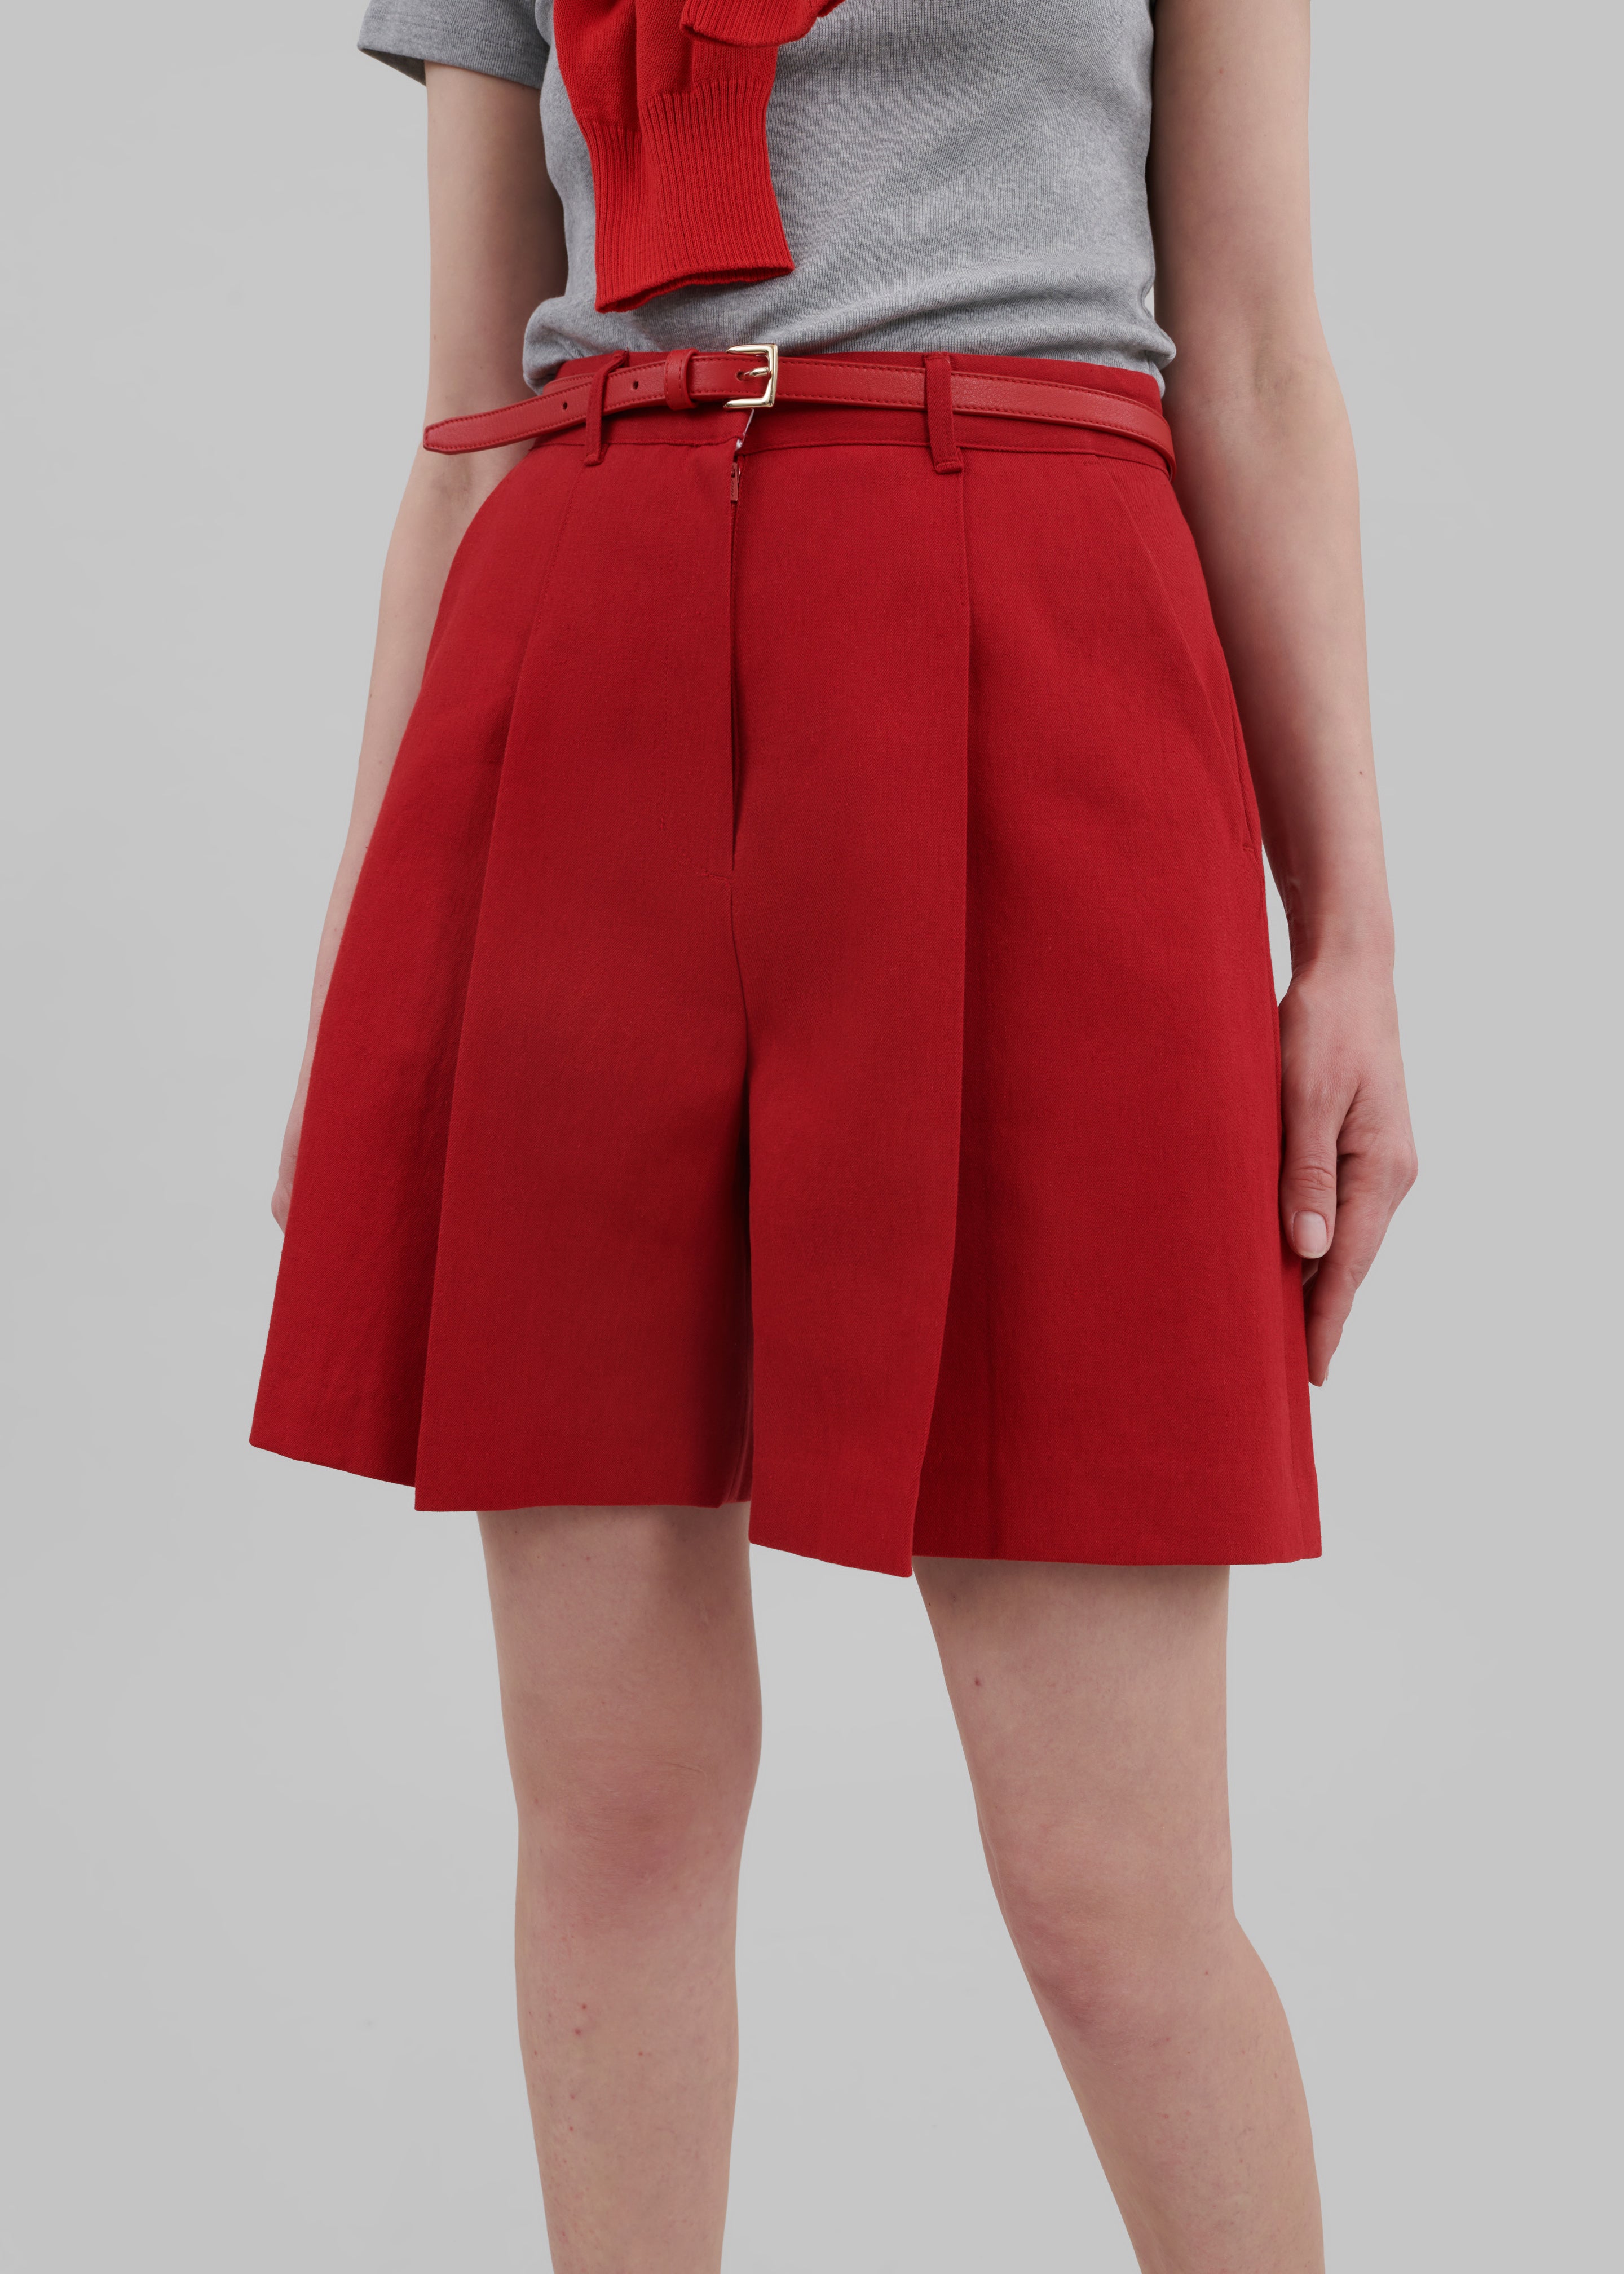 Angie Shorts - Red - 4